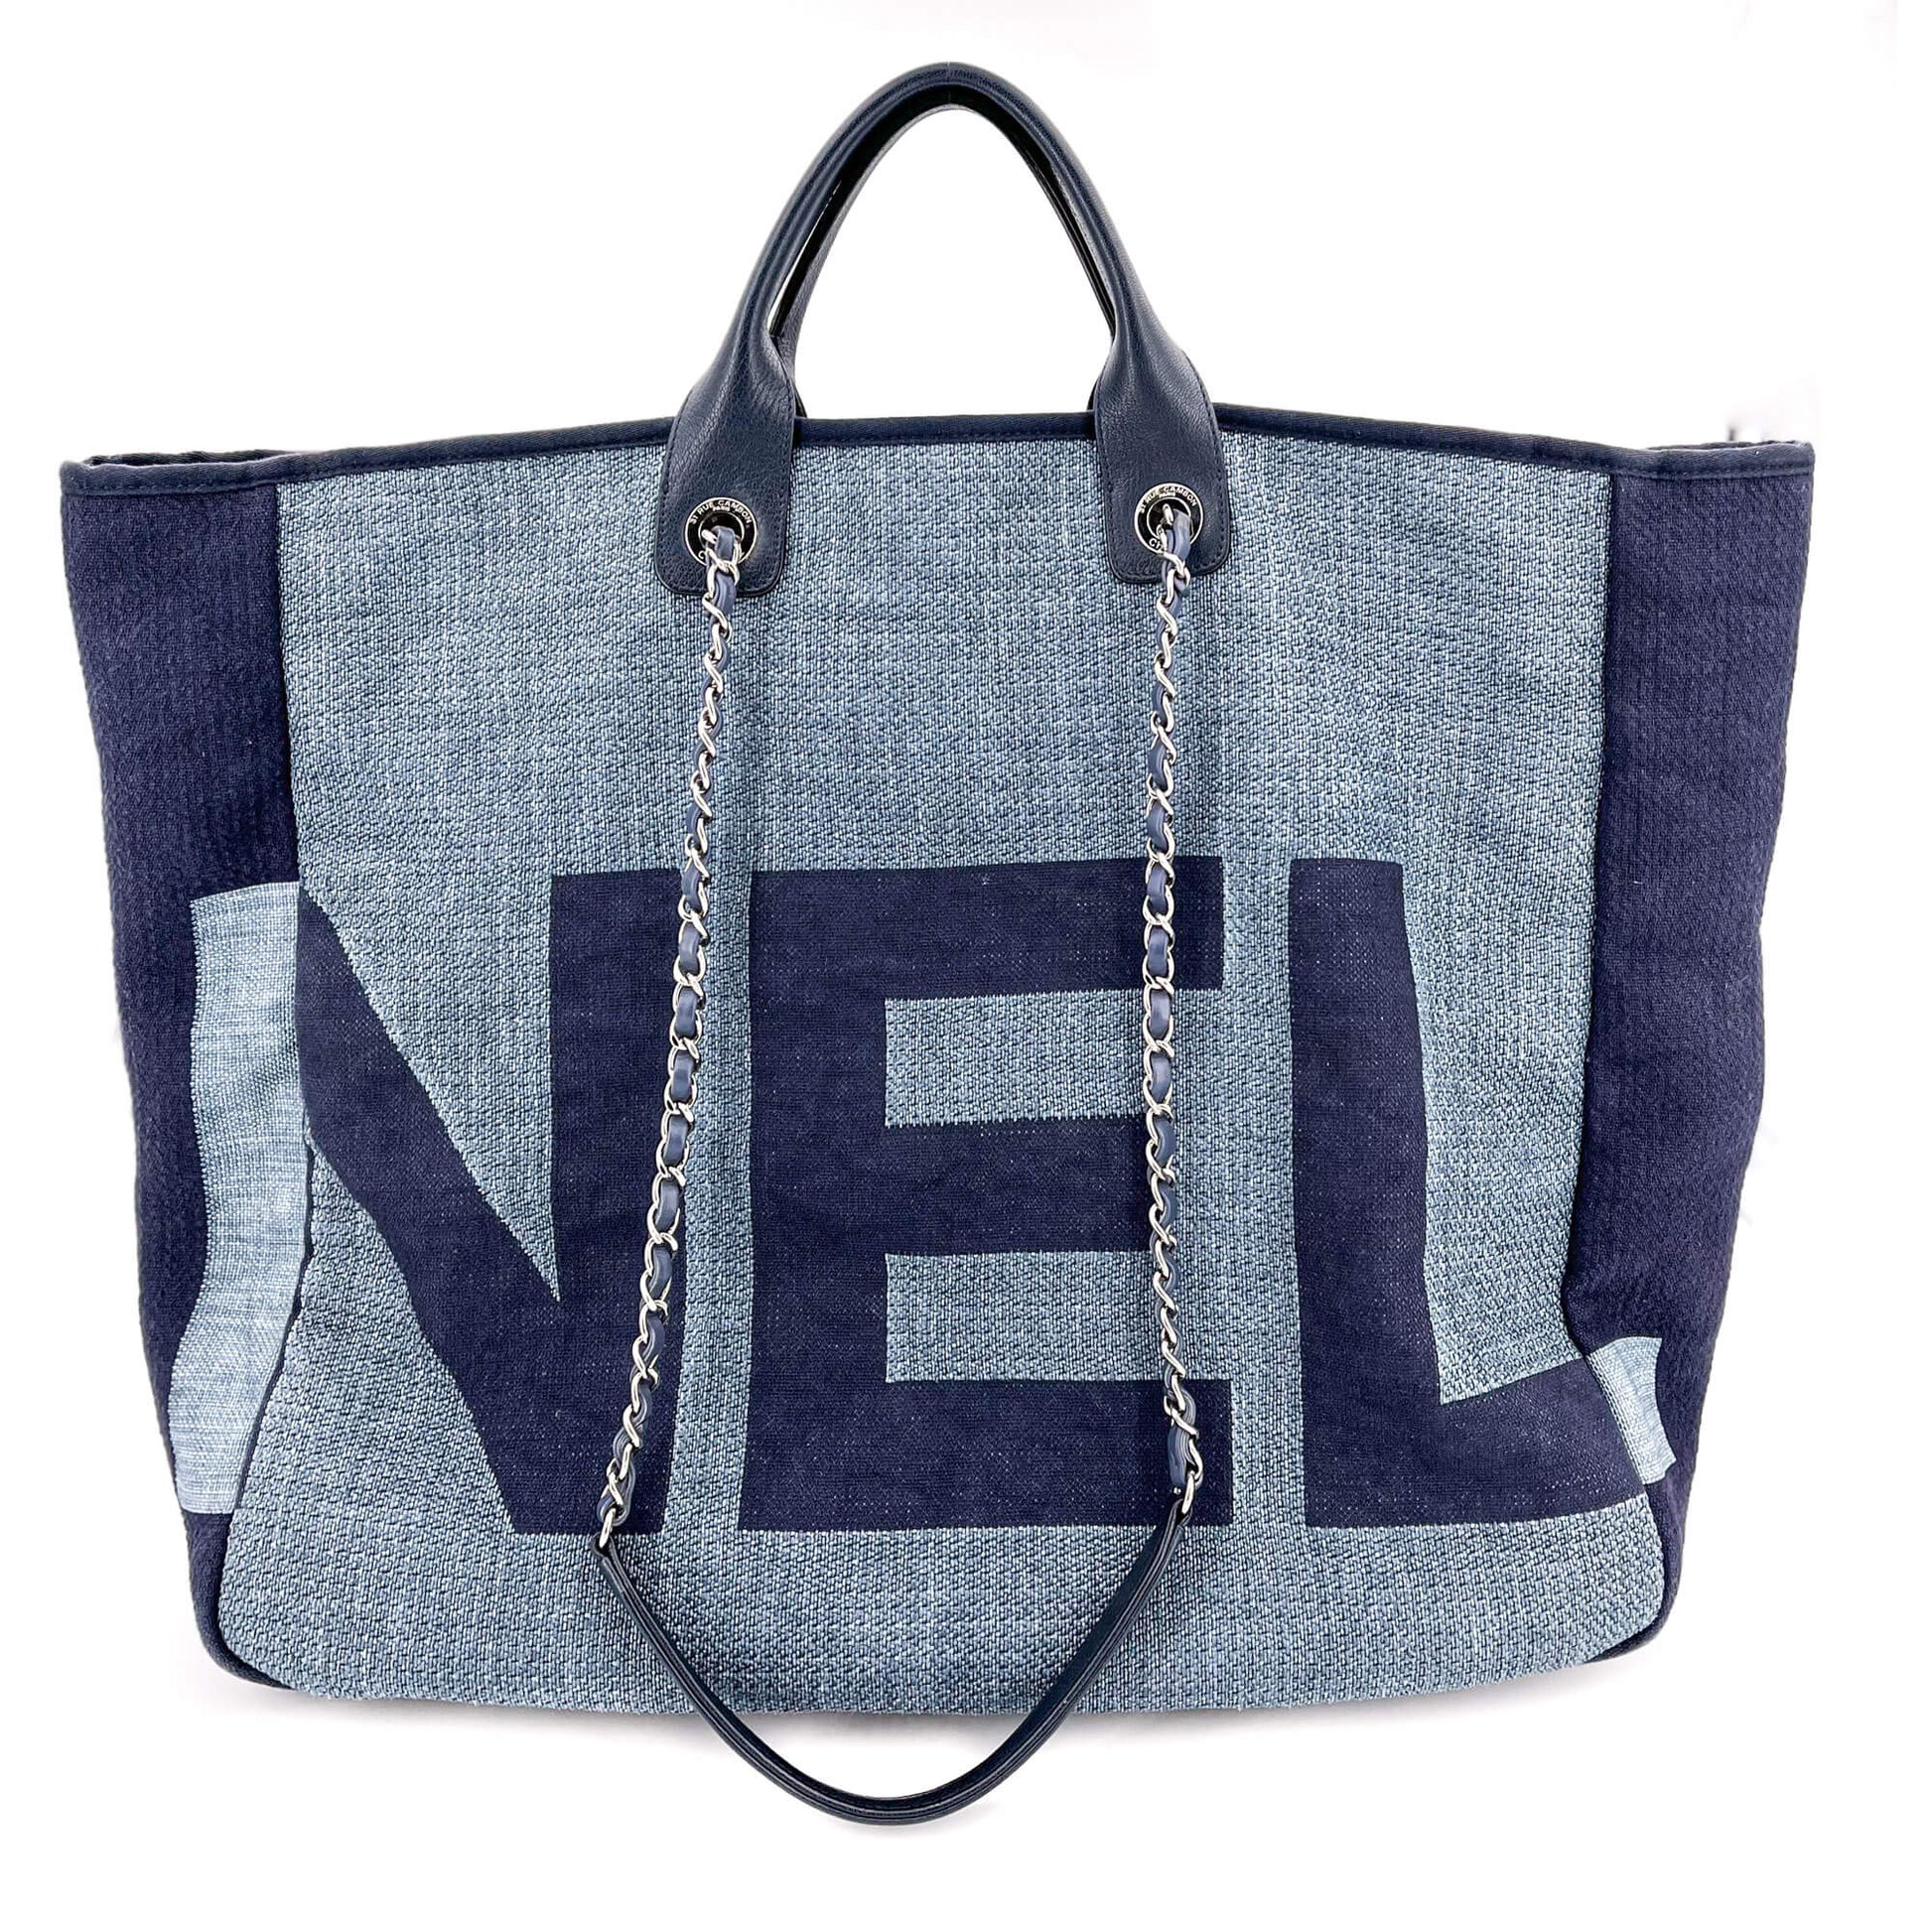 Chanel Deauville Logo Shopping Tote Printed Raffia Large worn by Brynn  Whitfield as seen in The Real Housewives of New York City (S14E08)